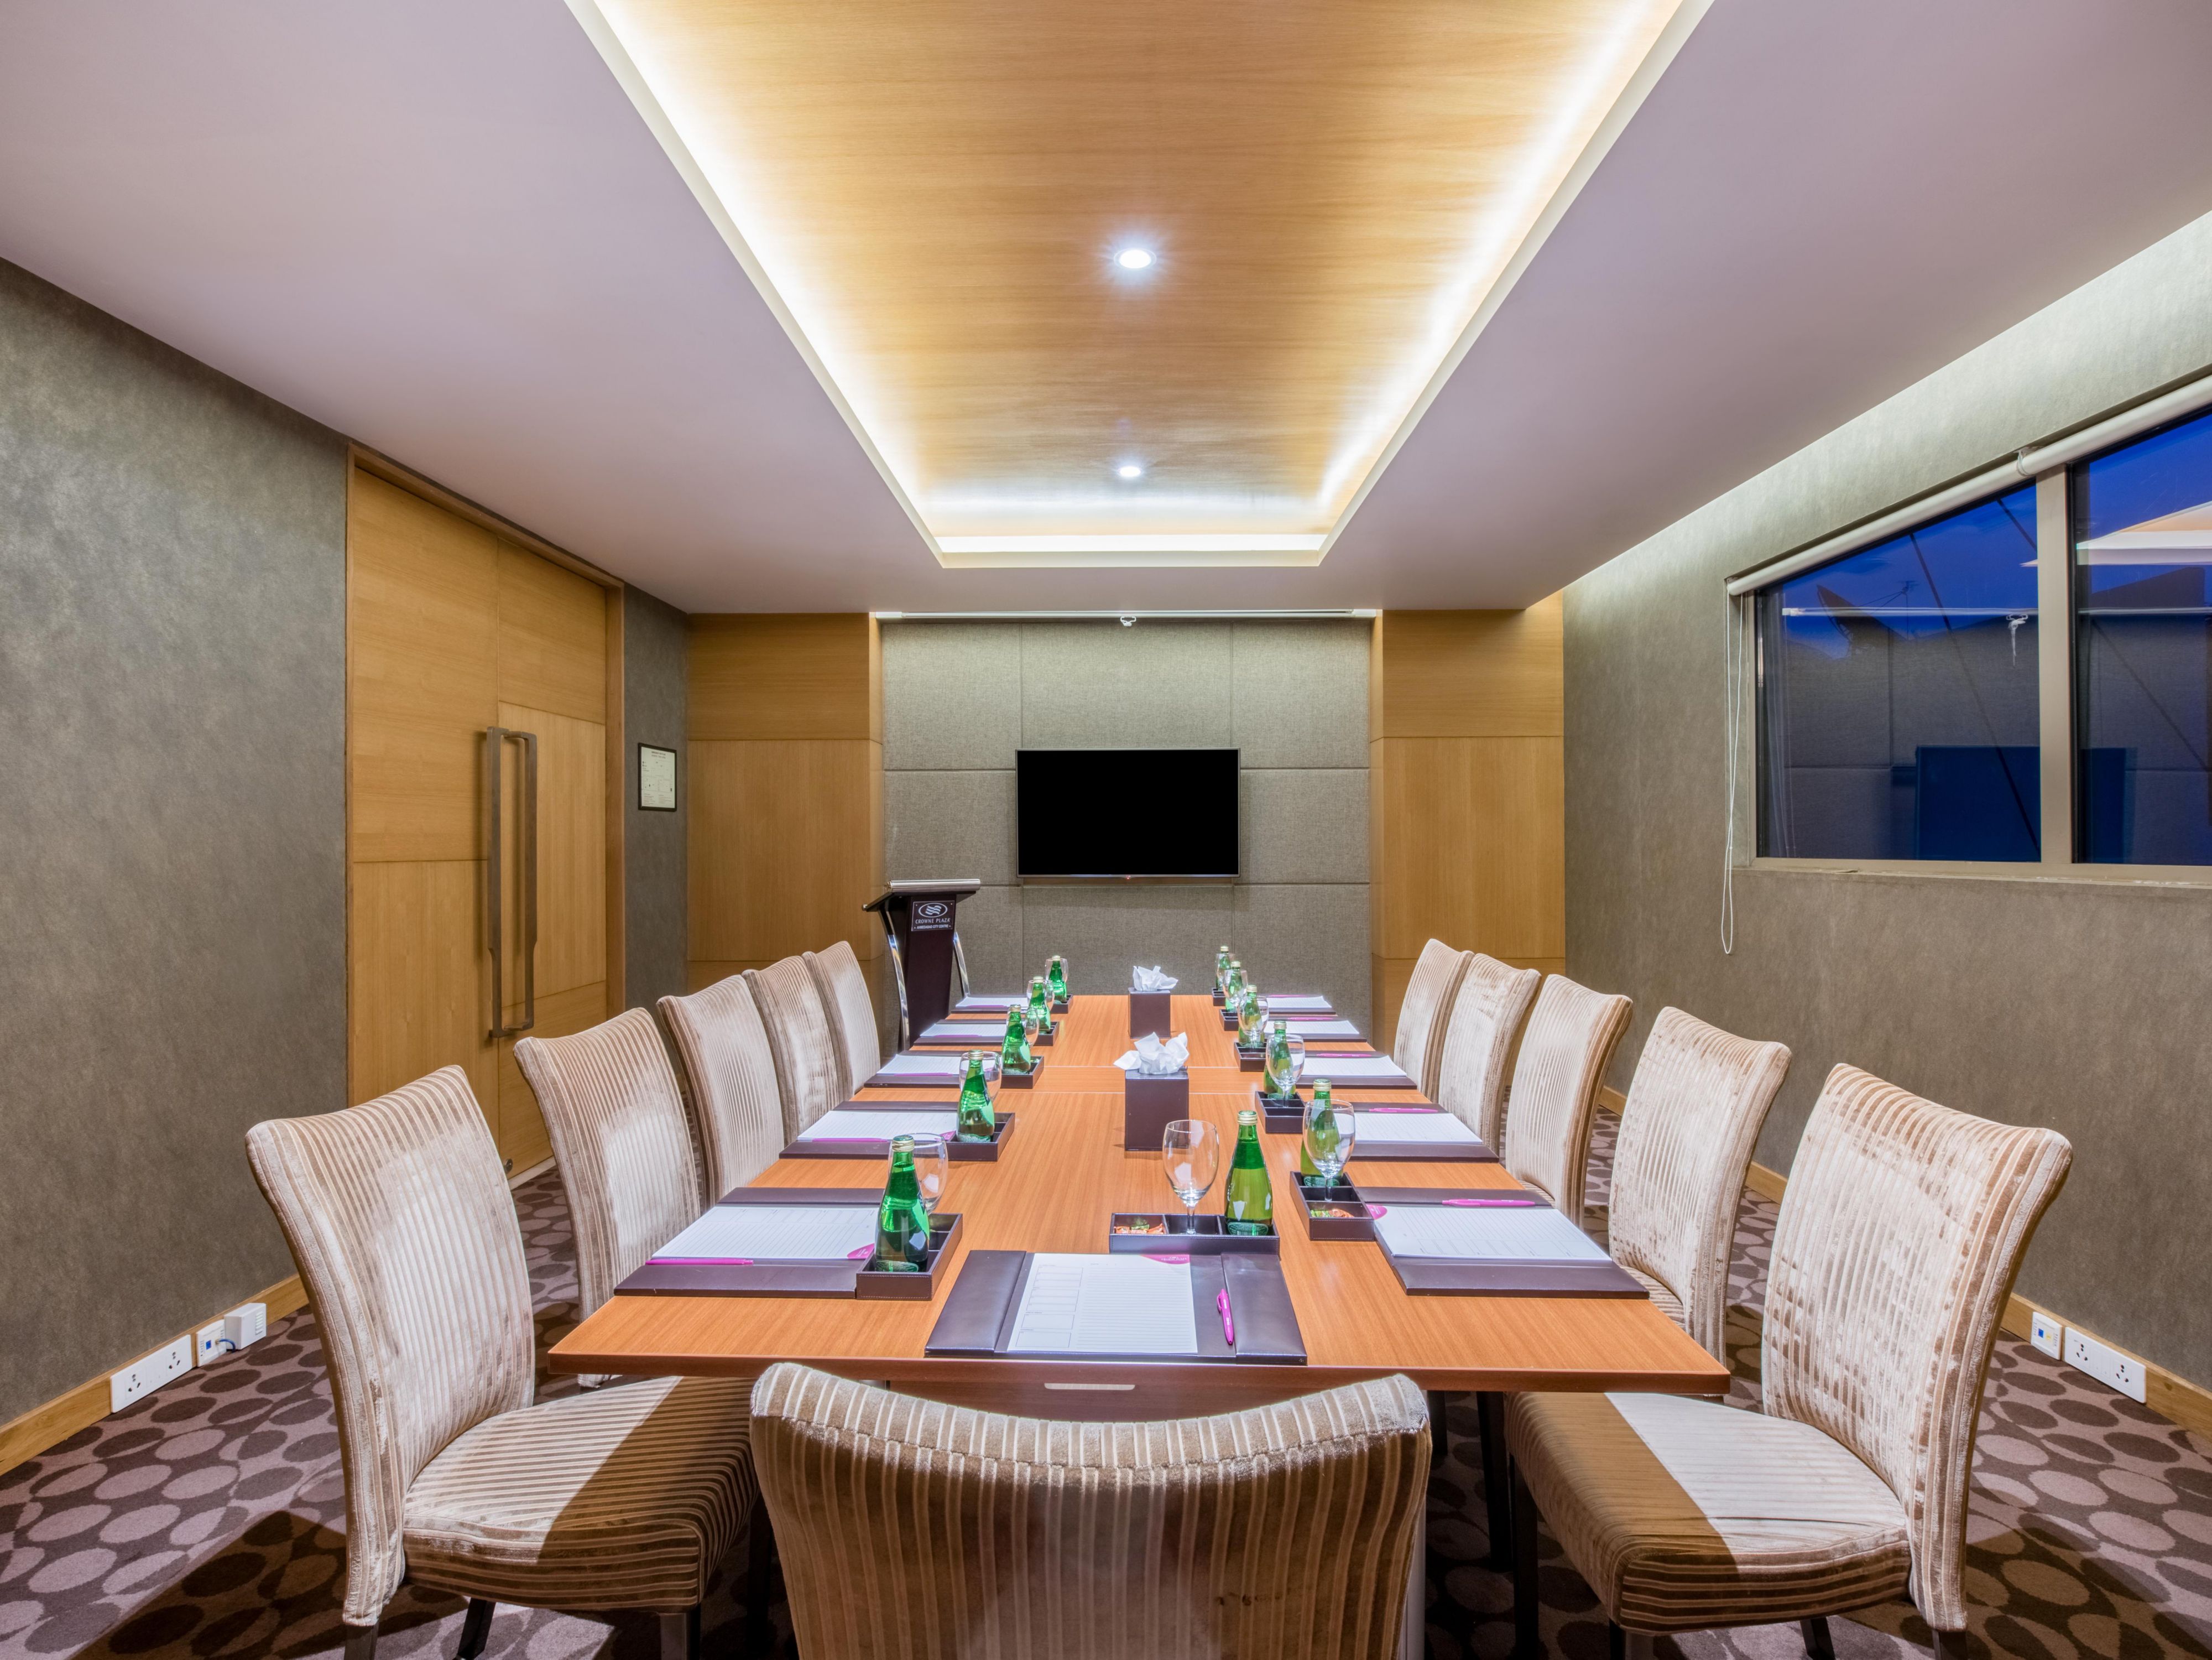 With 16,644 square feet of flexible meeting and event space, the hotel offers everything you need to plan the perfect function. Our hotel's dynamic spaces include one of the largest pillar-free ballrooms and has a private pre-function area.

